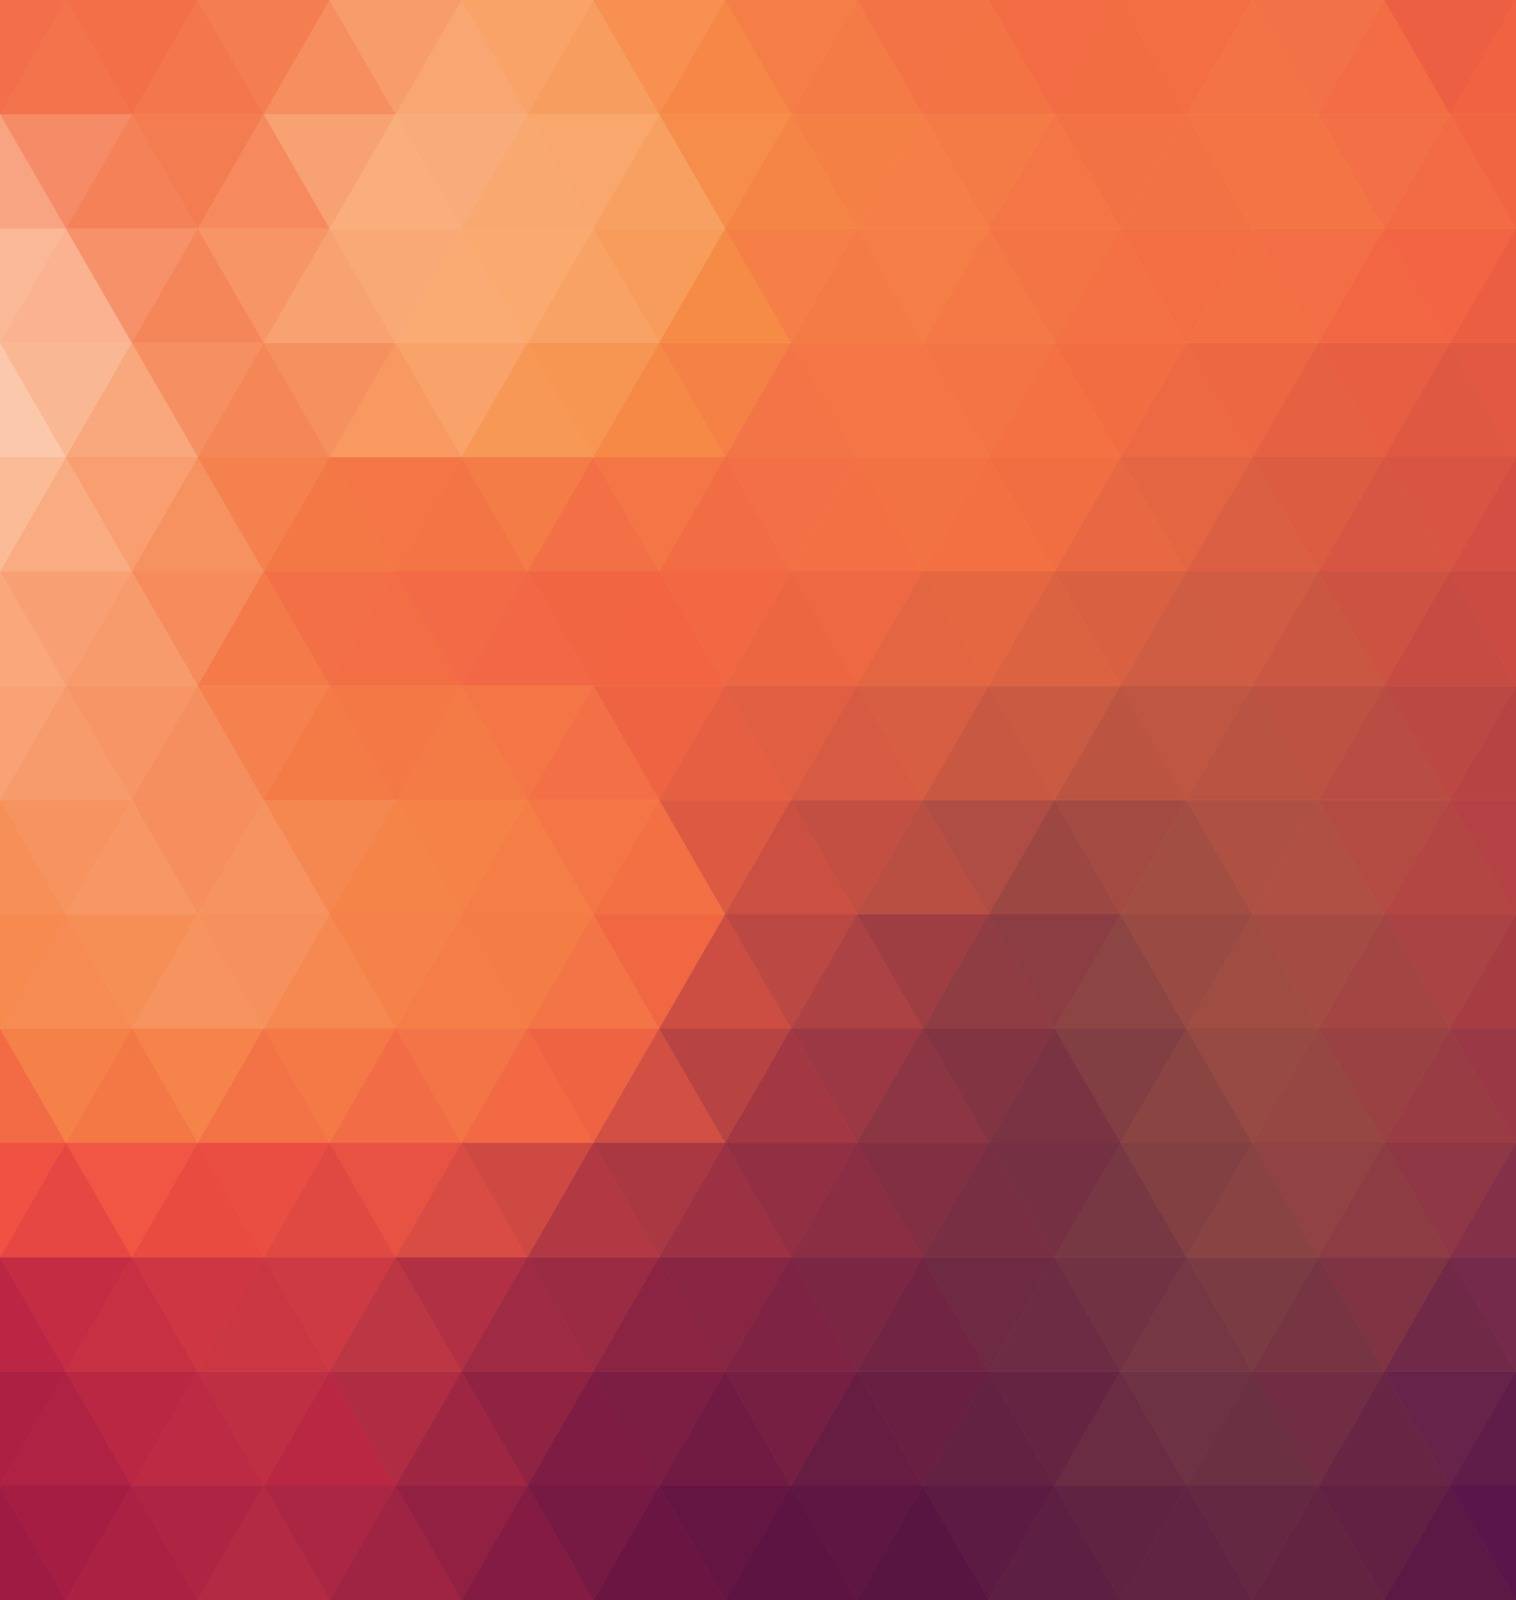 Abstract geometric pattern with for background, Vector